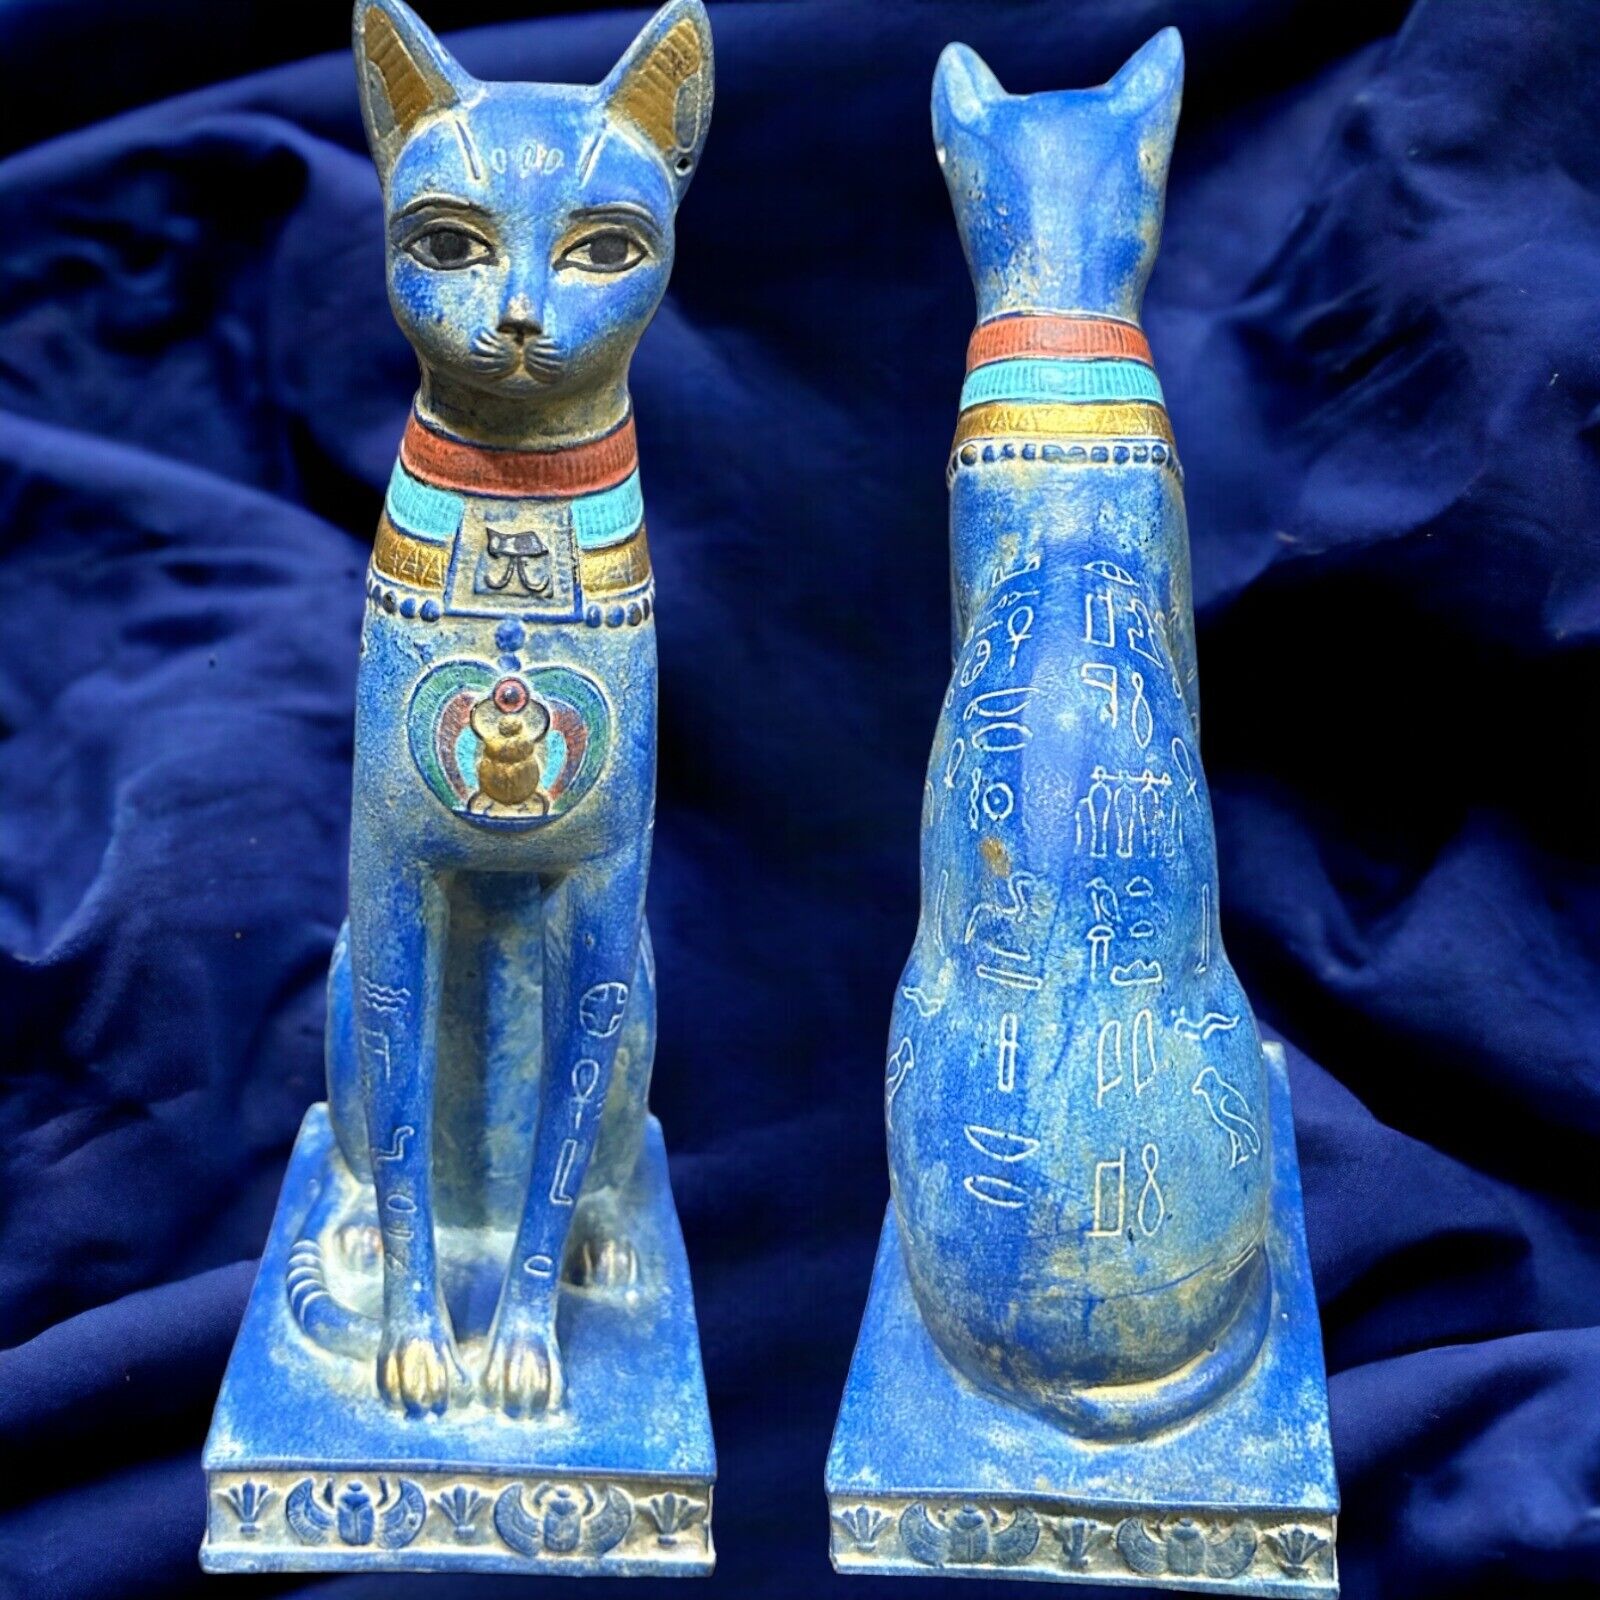 Rare Handcrafted Egyptian Bastet Goddess Statue - Antique Replica for Happiness